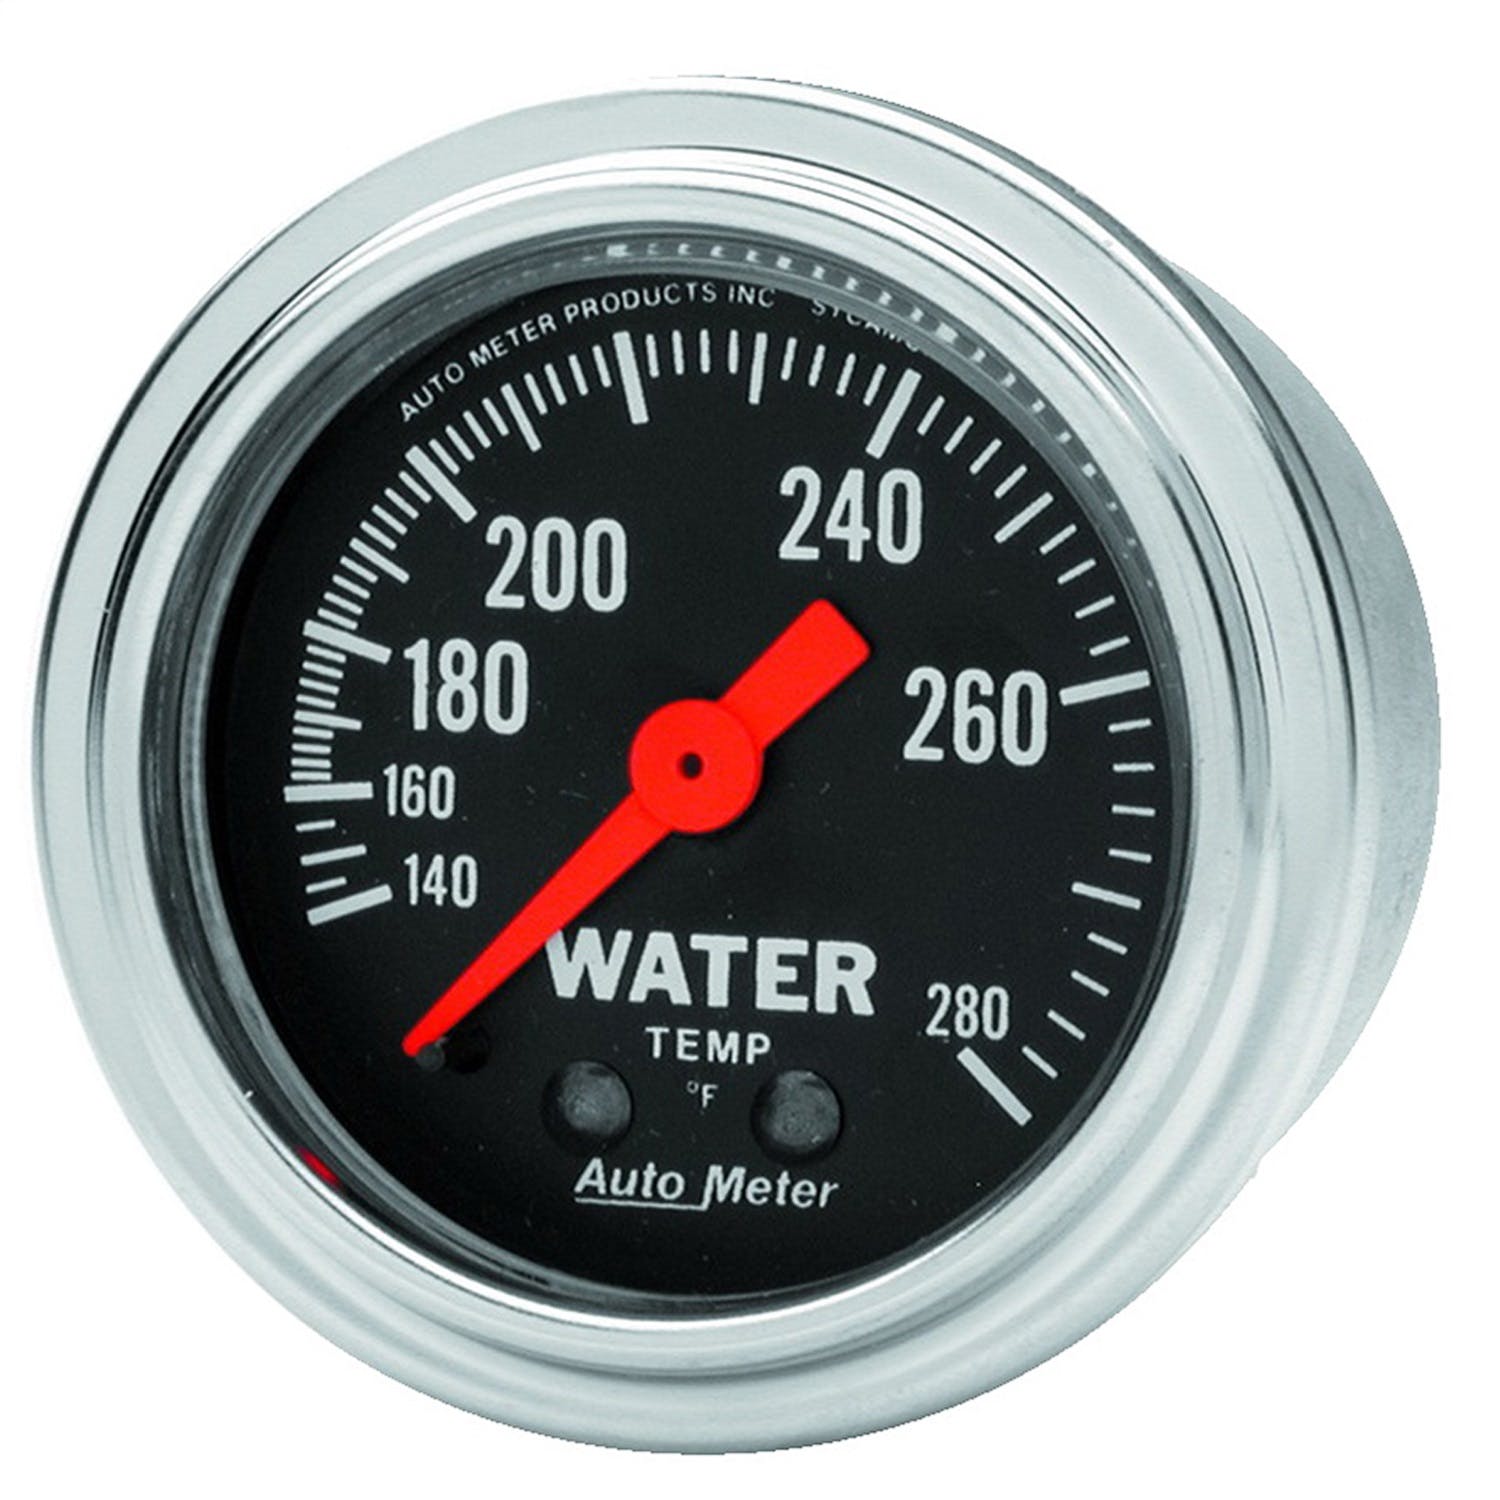 AutoMeter Products 2431 Water Temp 140-280 F